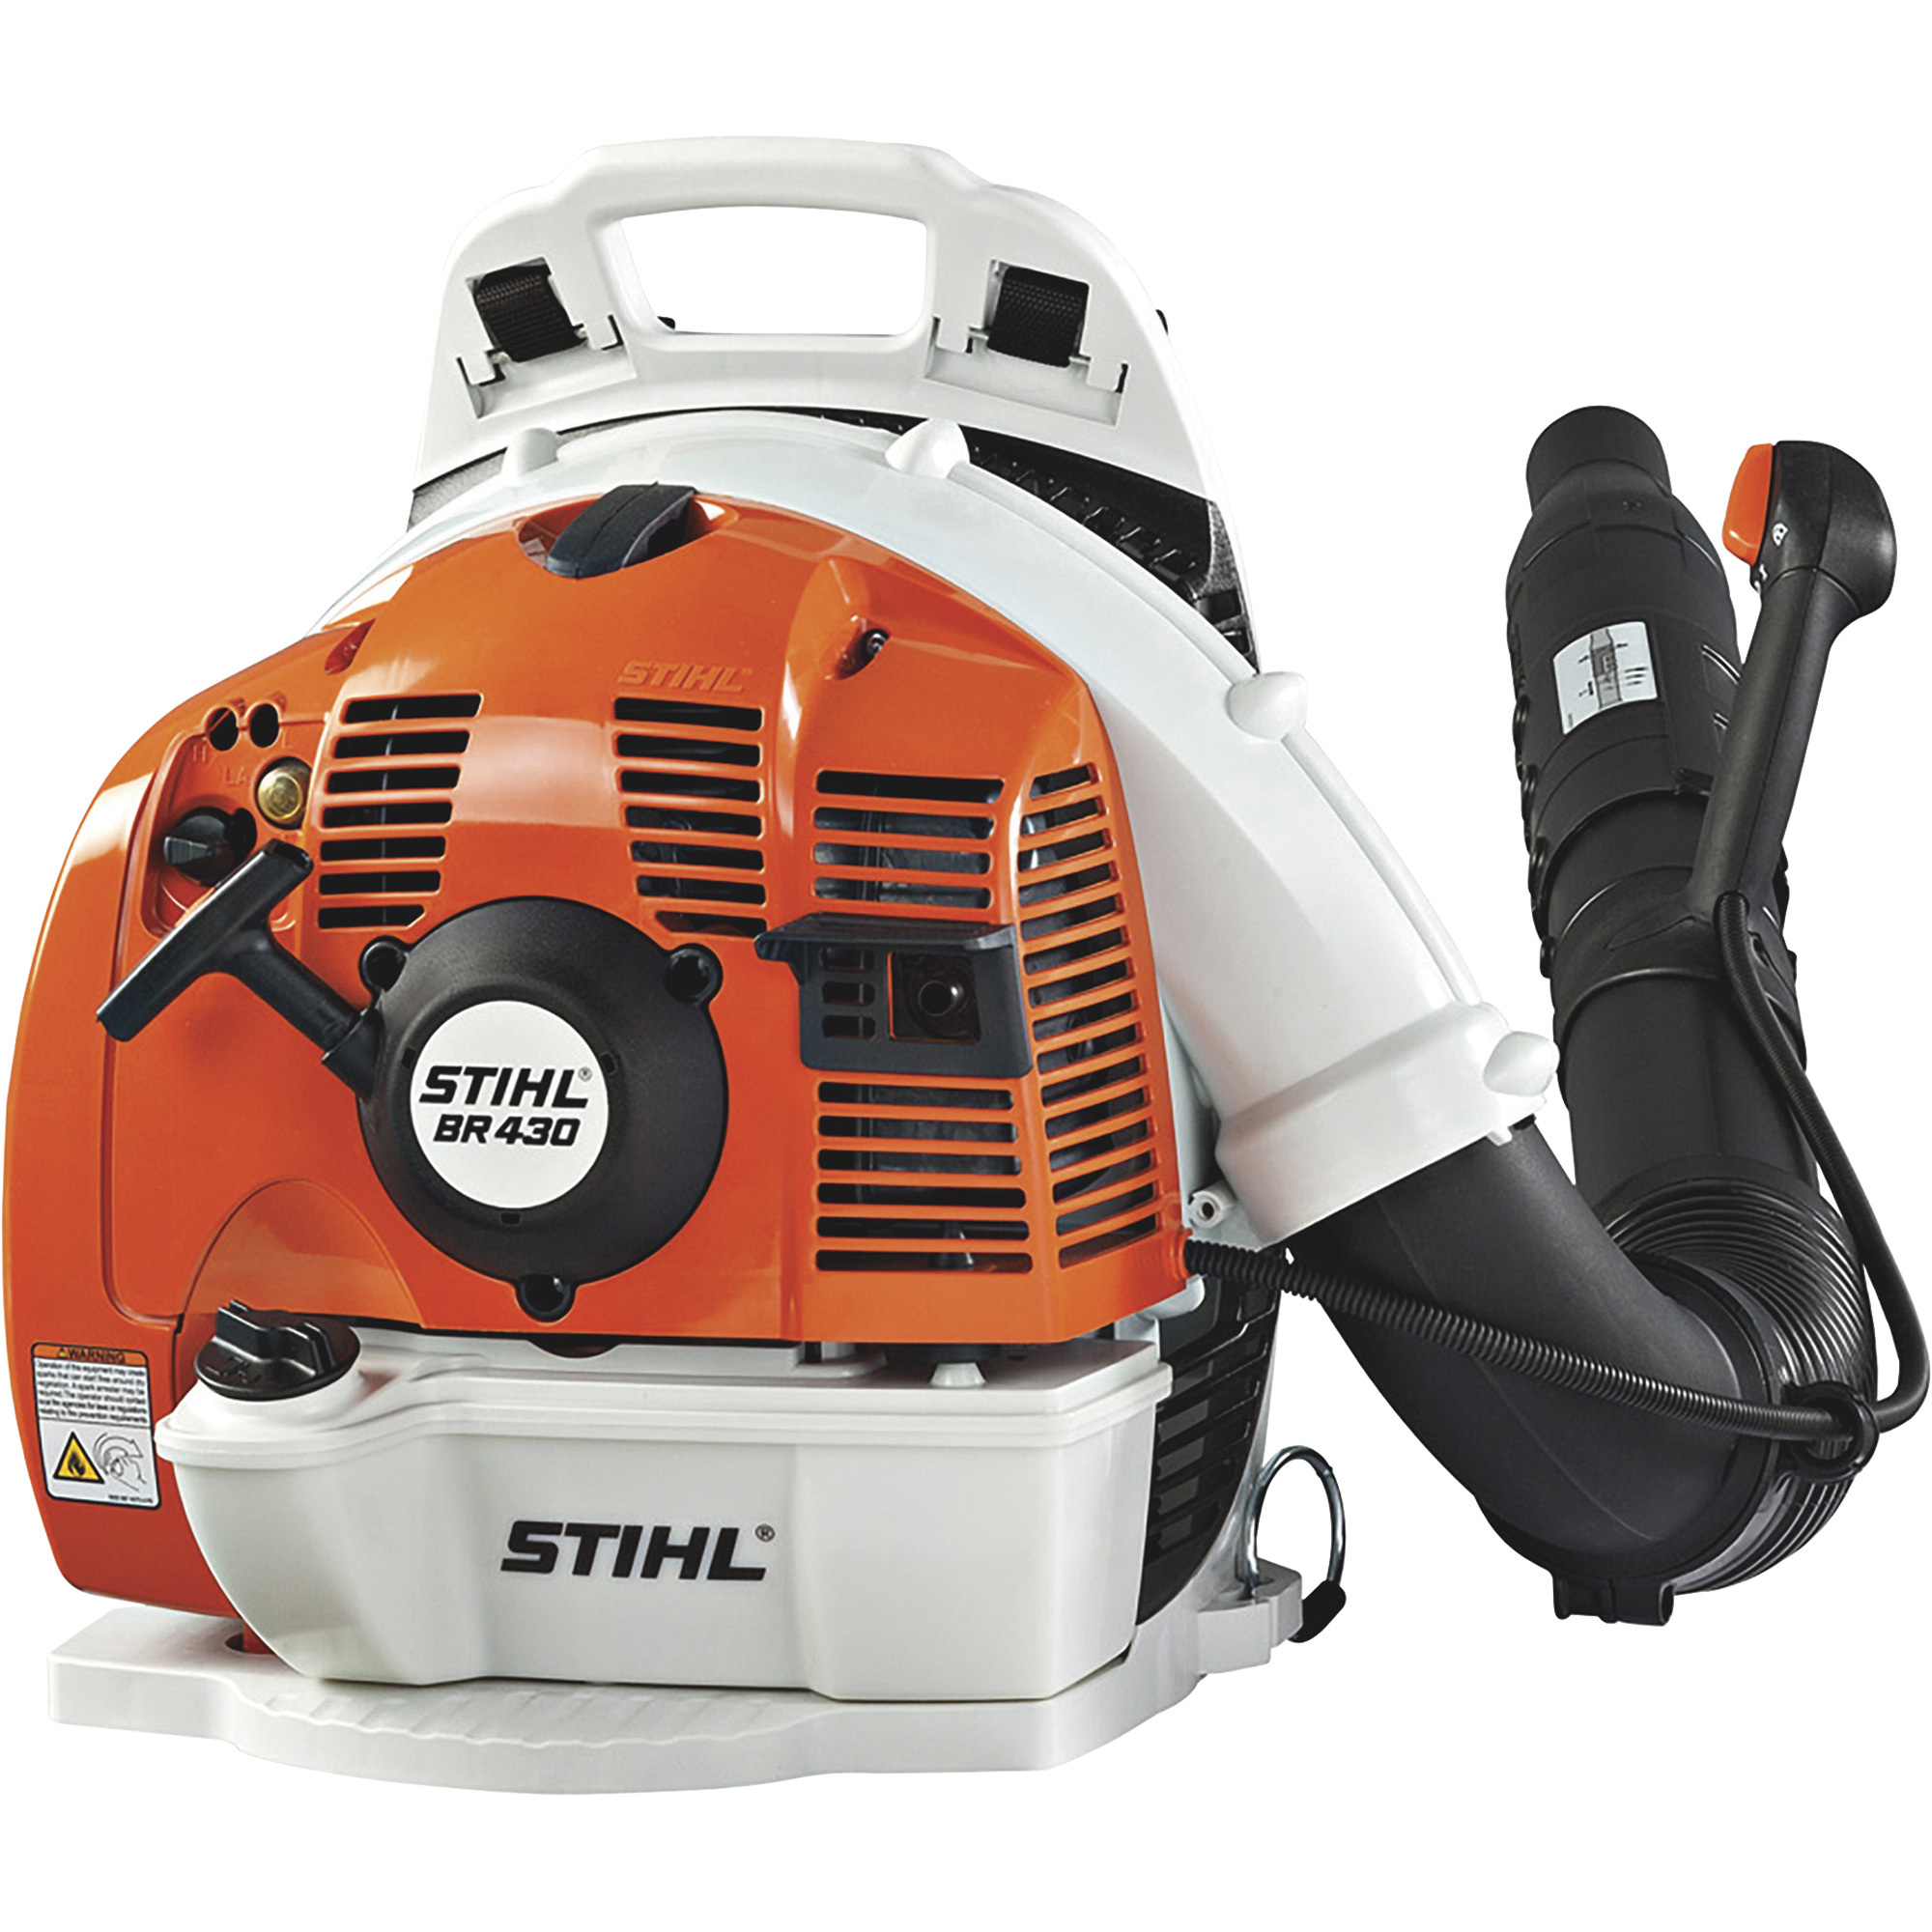 Stihl BR Series Gas-Powered Backpack Blower â 63.3cc, 183 MPH, 500 CFM, Model BR 430